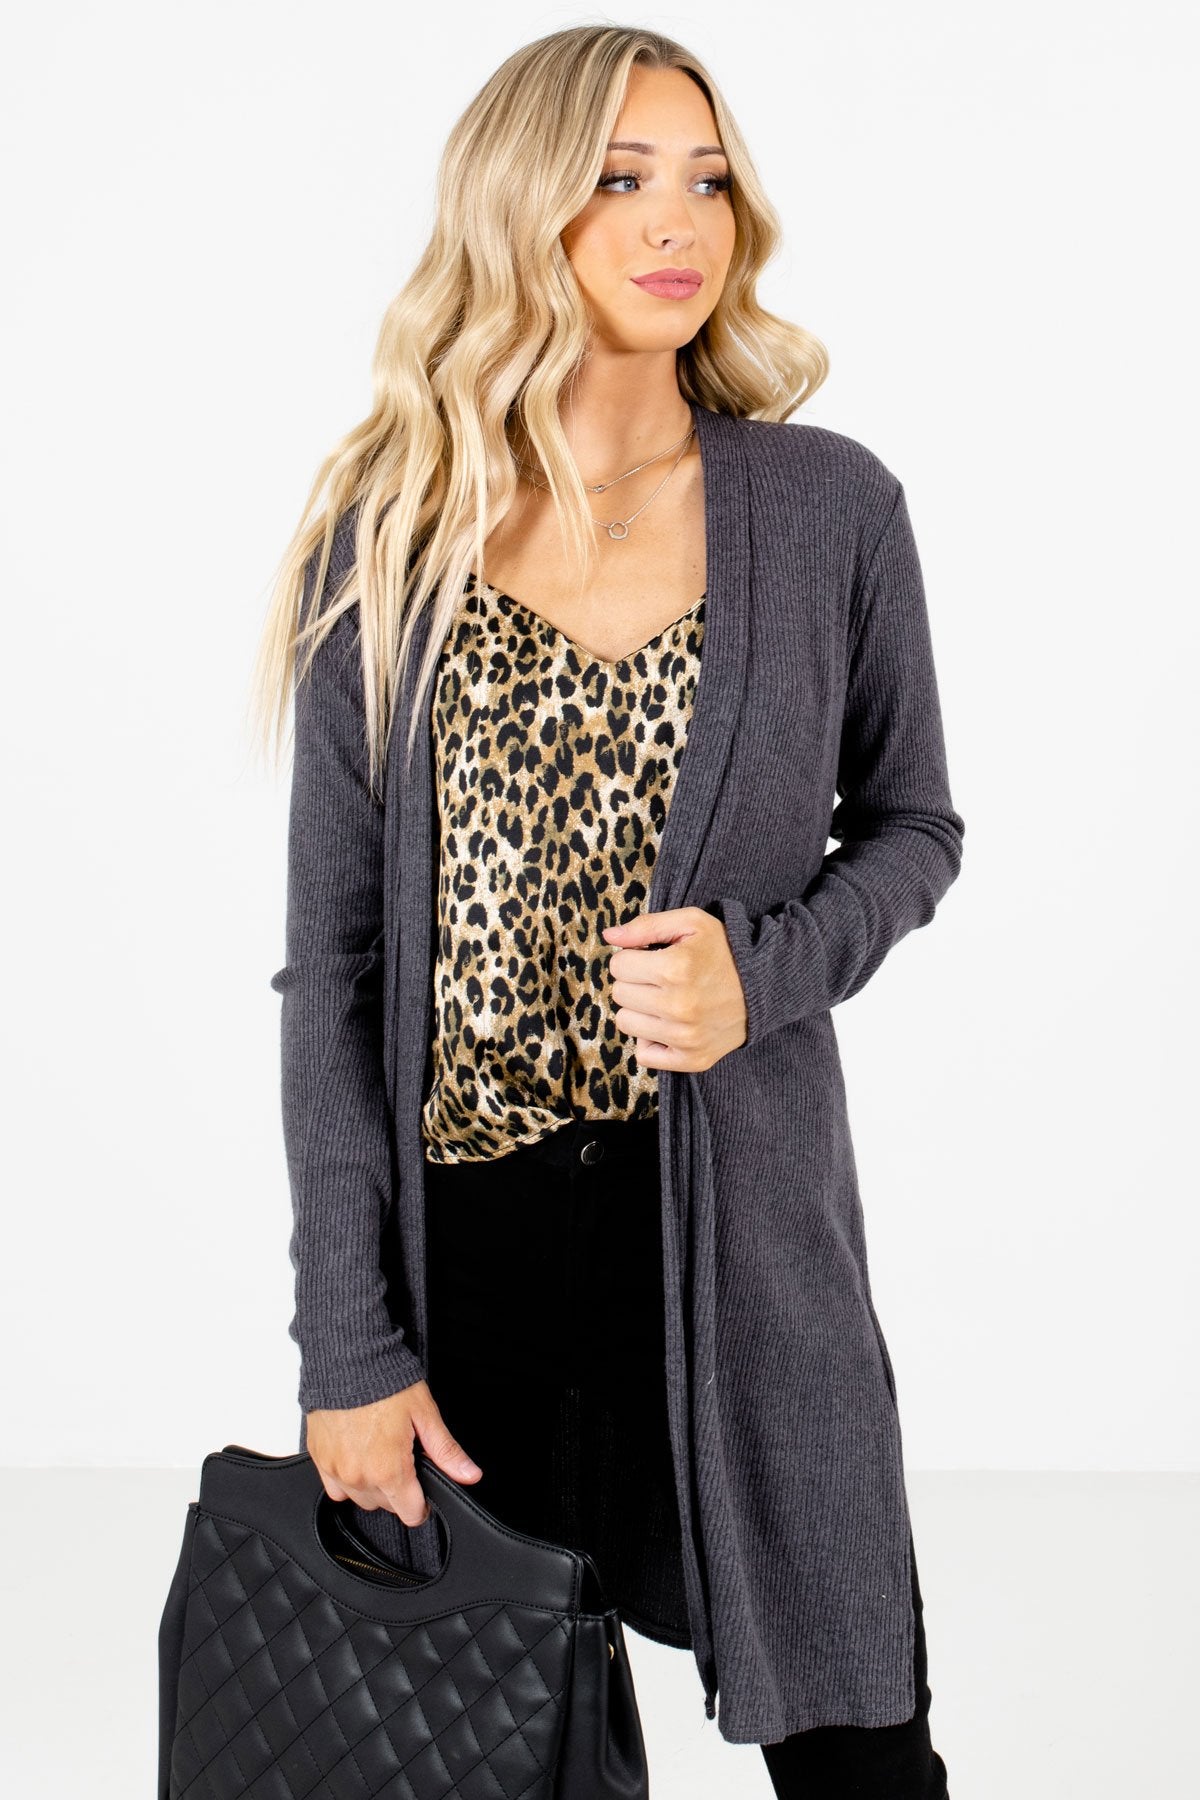 Charcoal Gray Cute and Comfortable Boutique Cardigans for Women